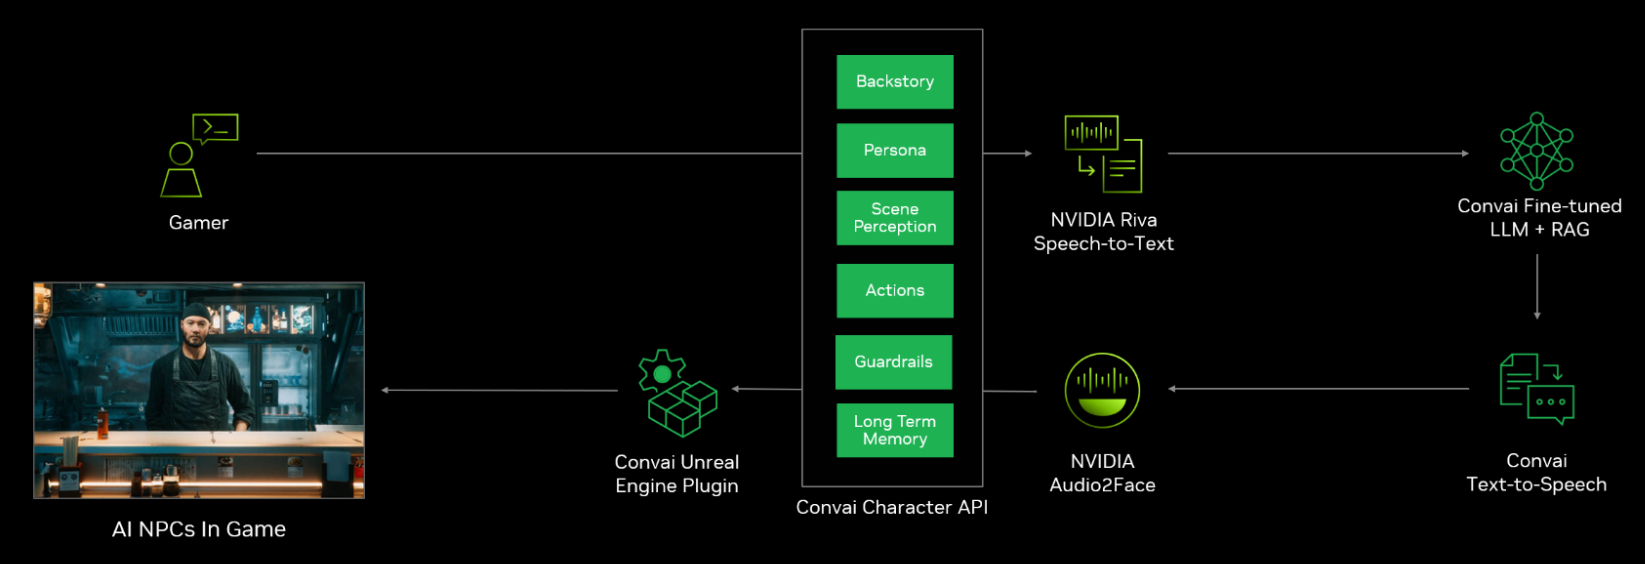 Diagram shows Convai character API workflow with NVIDIA microservices and the Convai Universal Engine plugin.